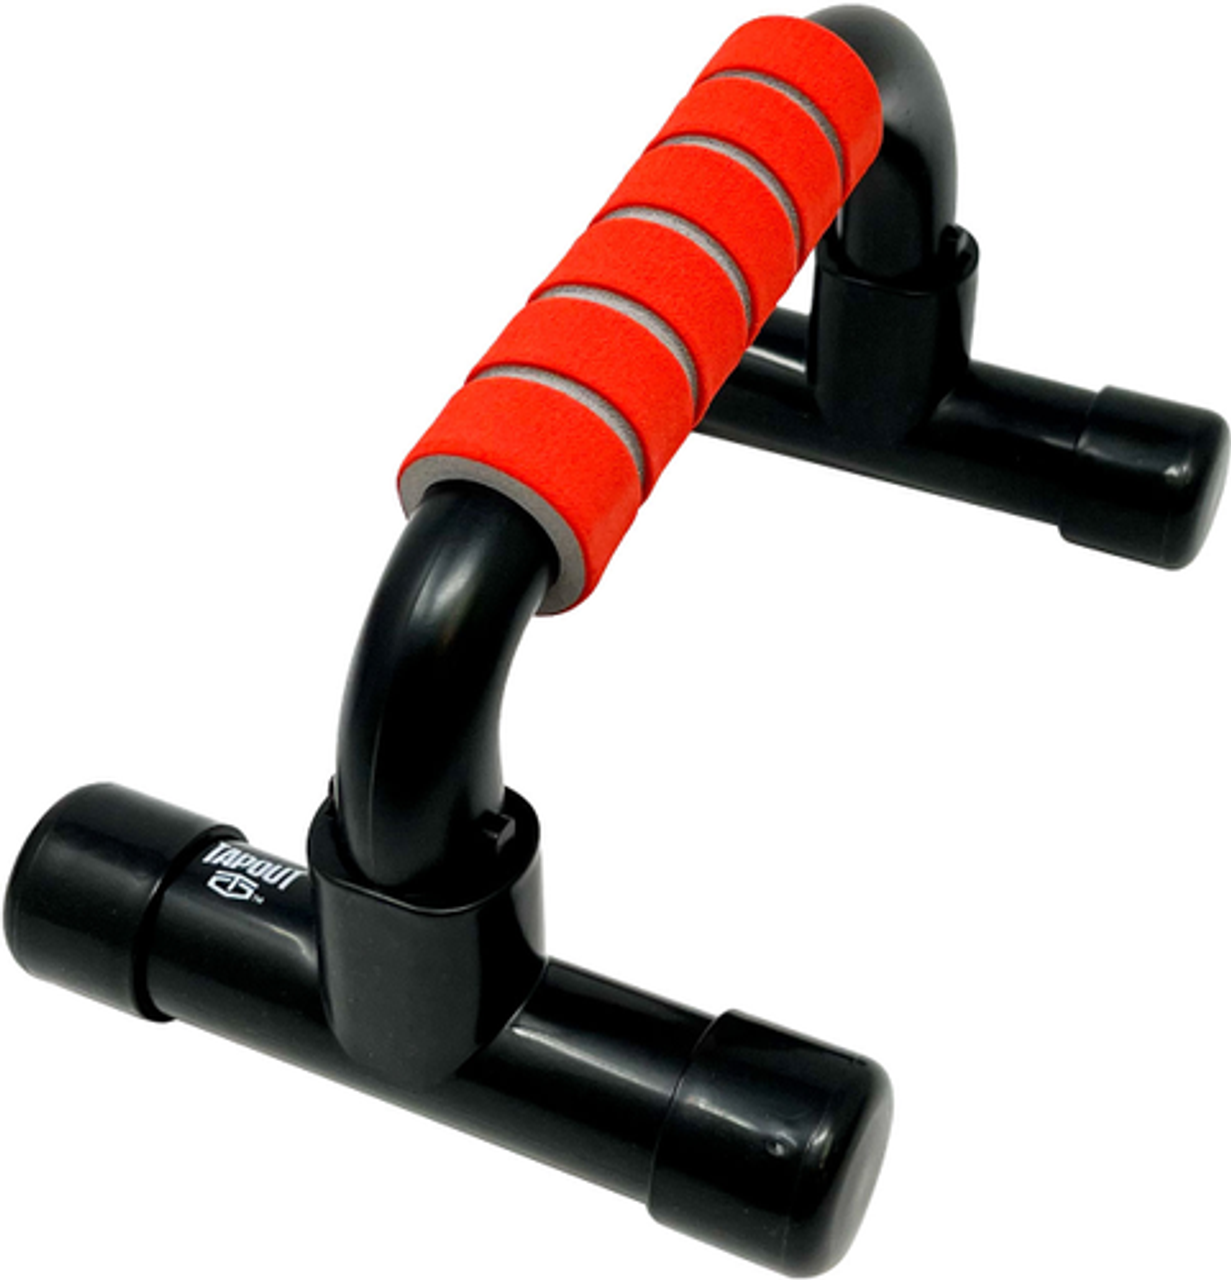 Tapout - Push Up Bars - Black and Red